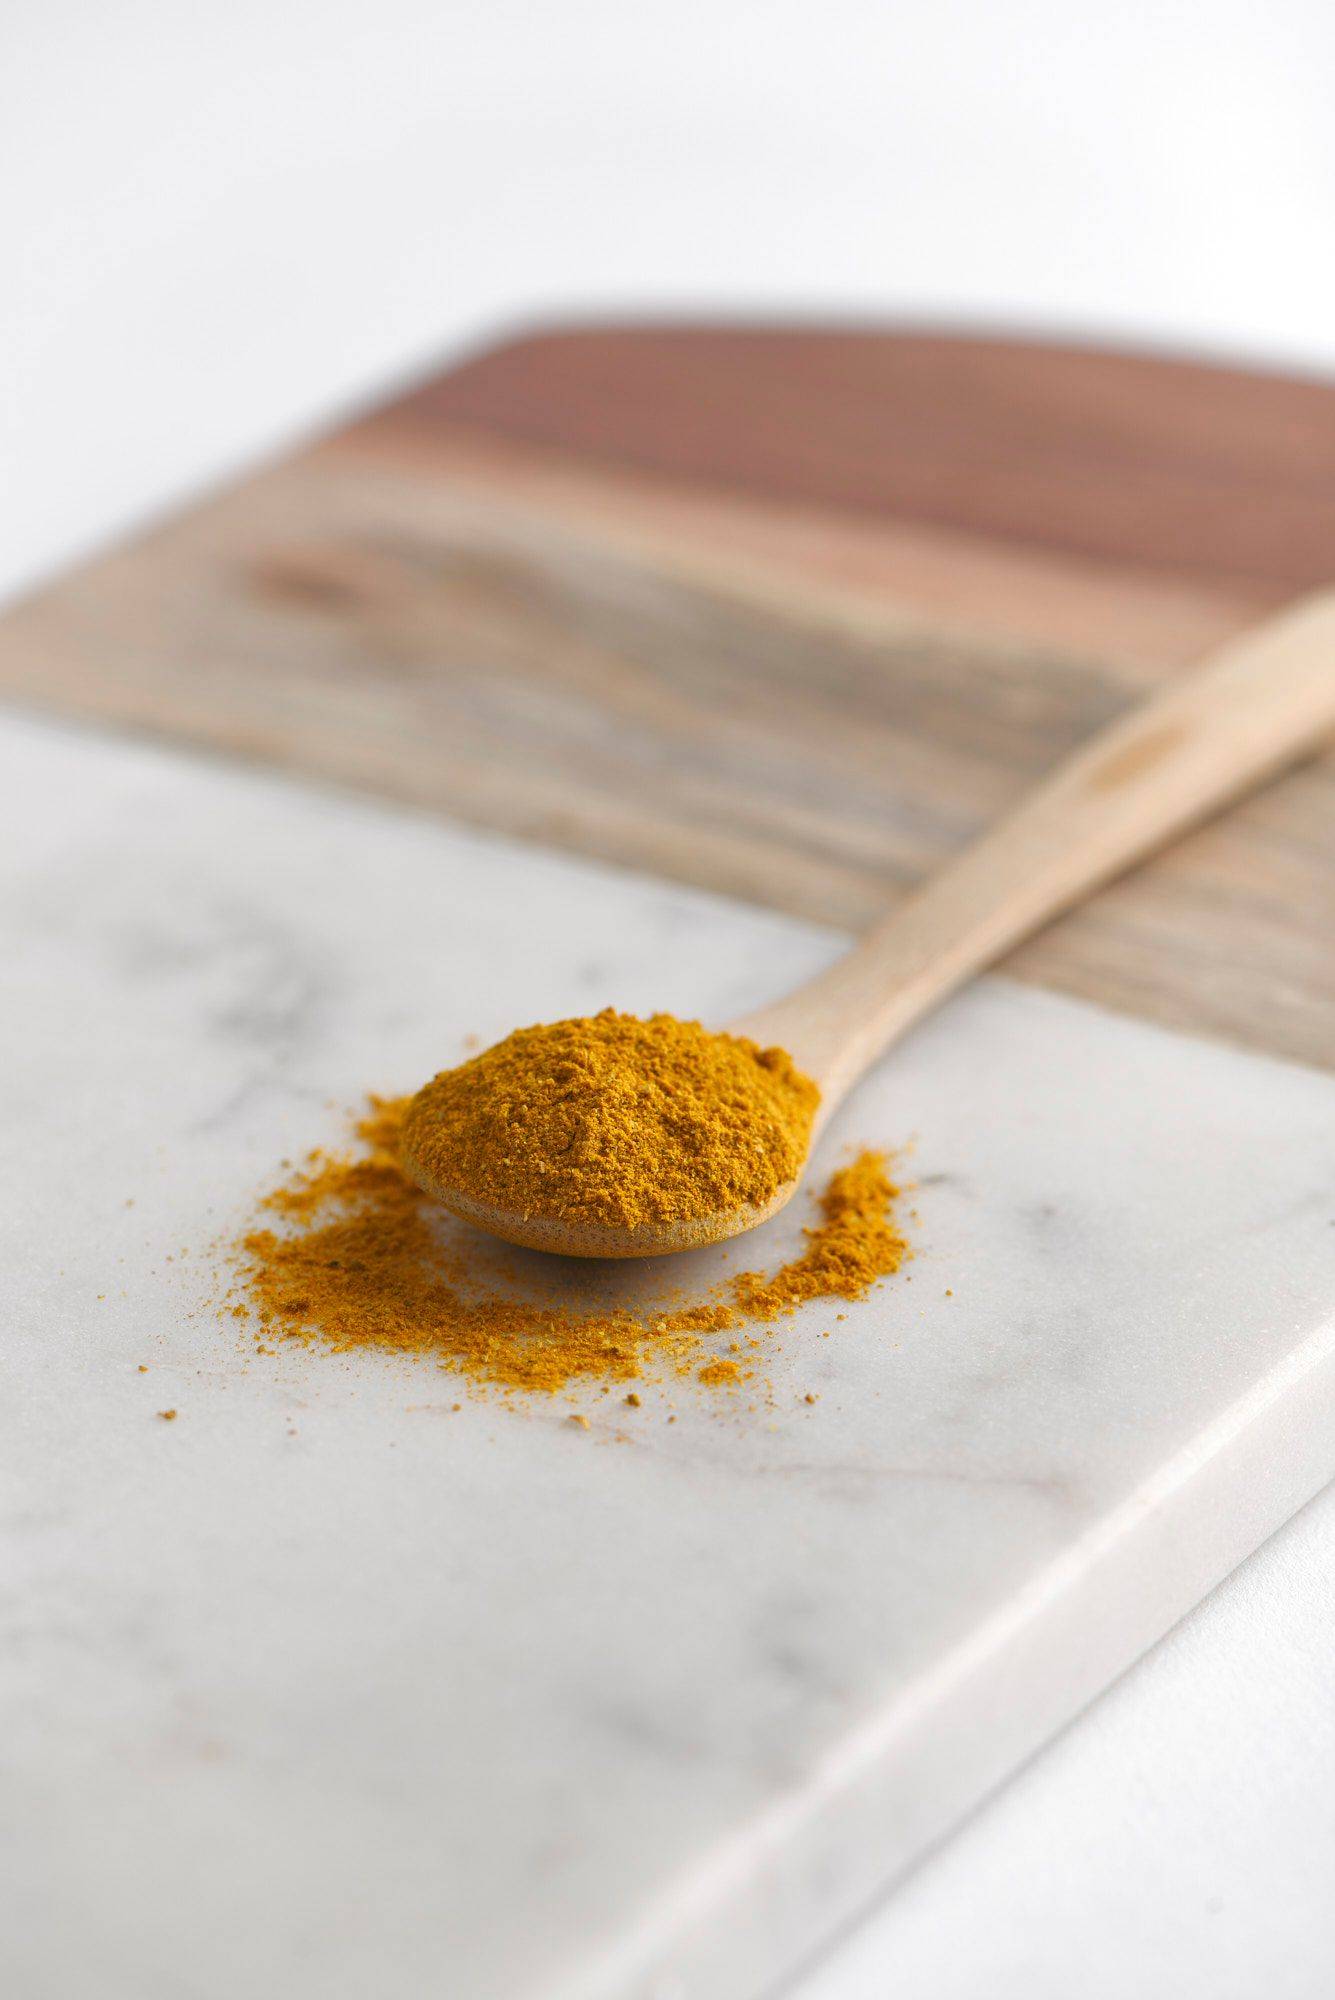 madras curry powder on a wooden spoon on a gray plate with white background